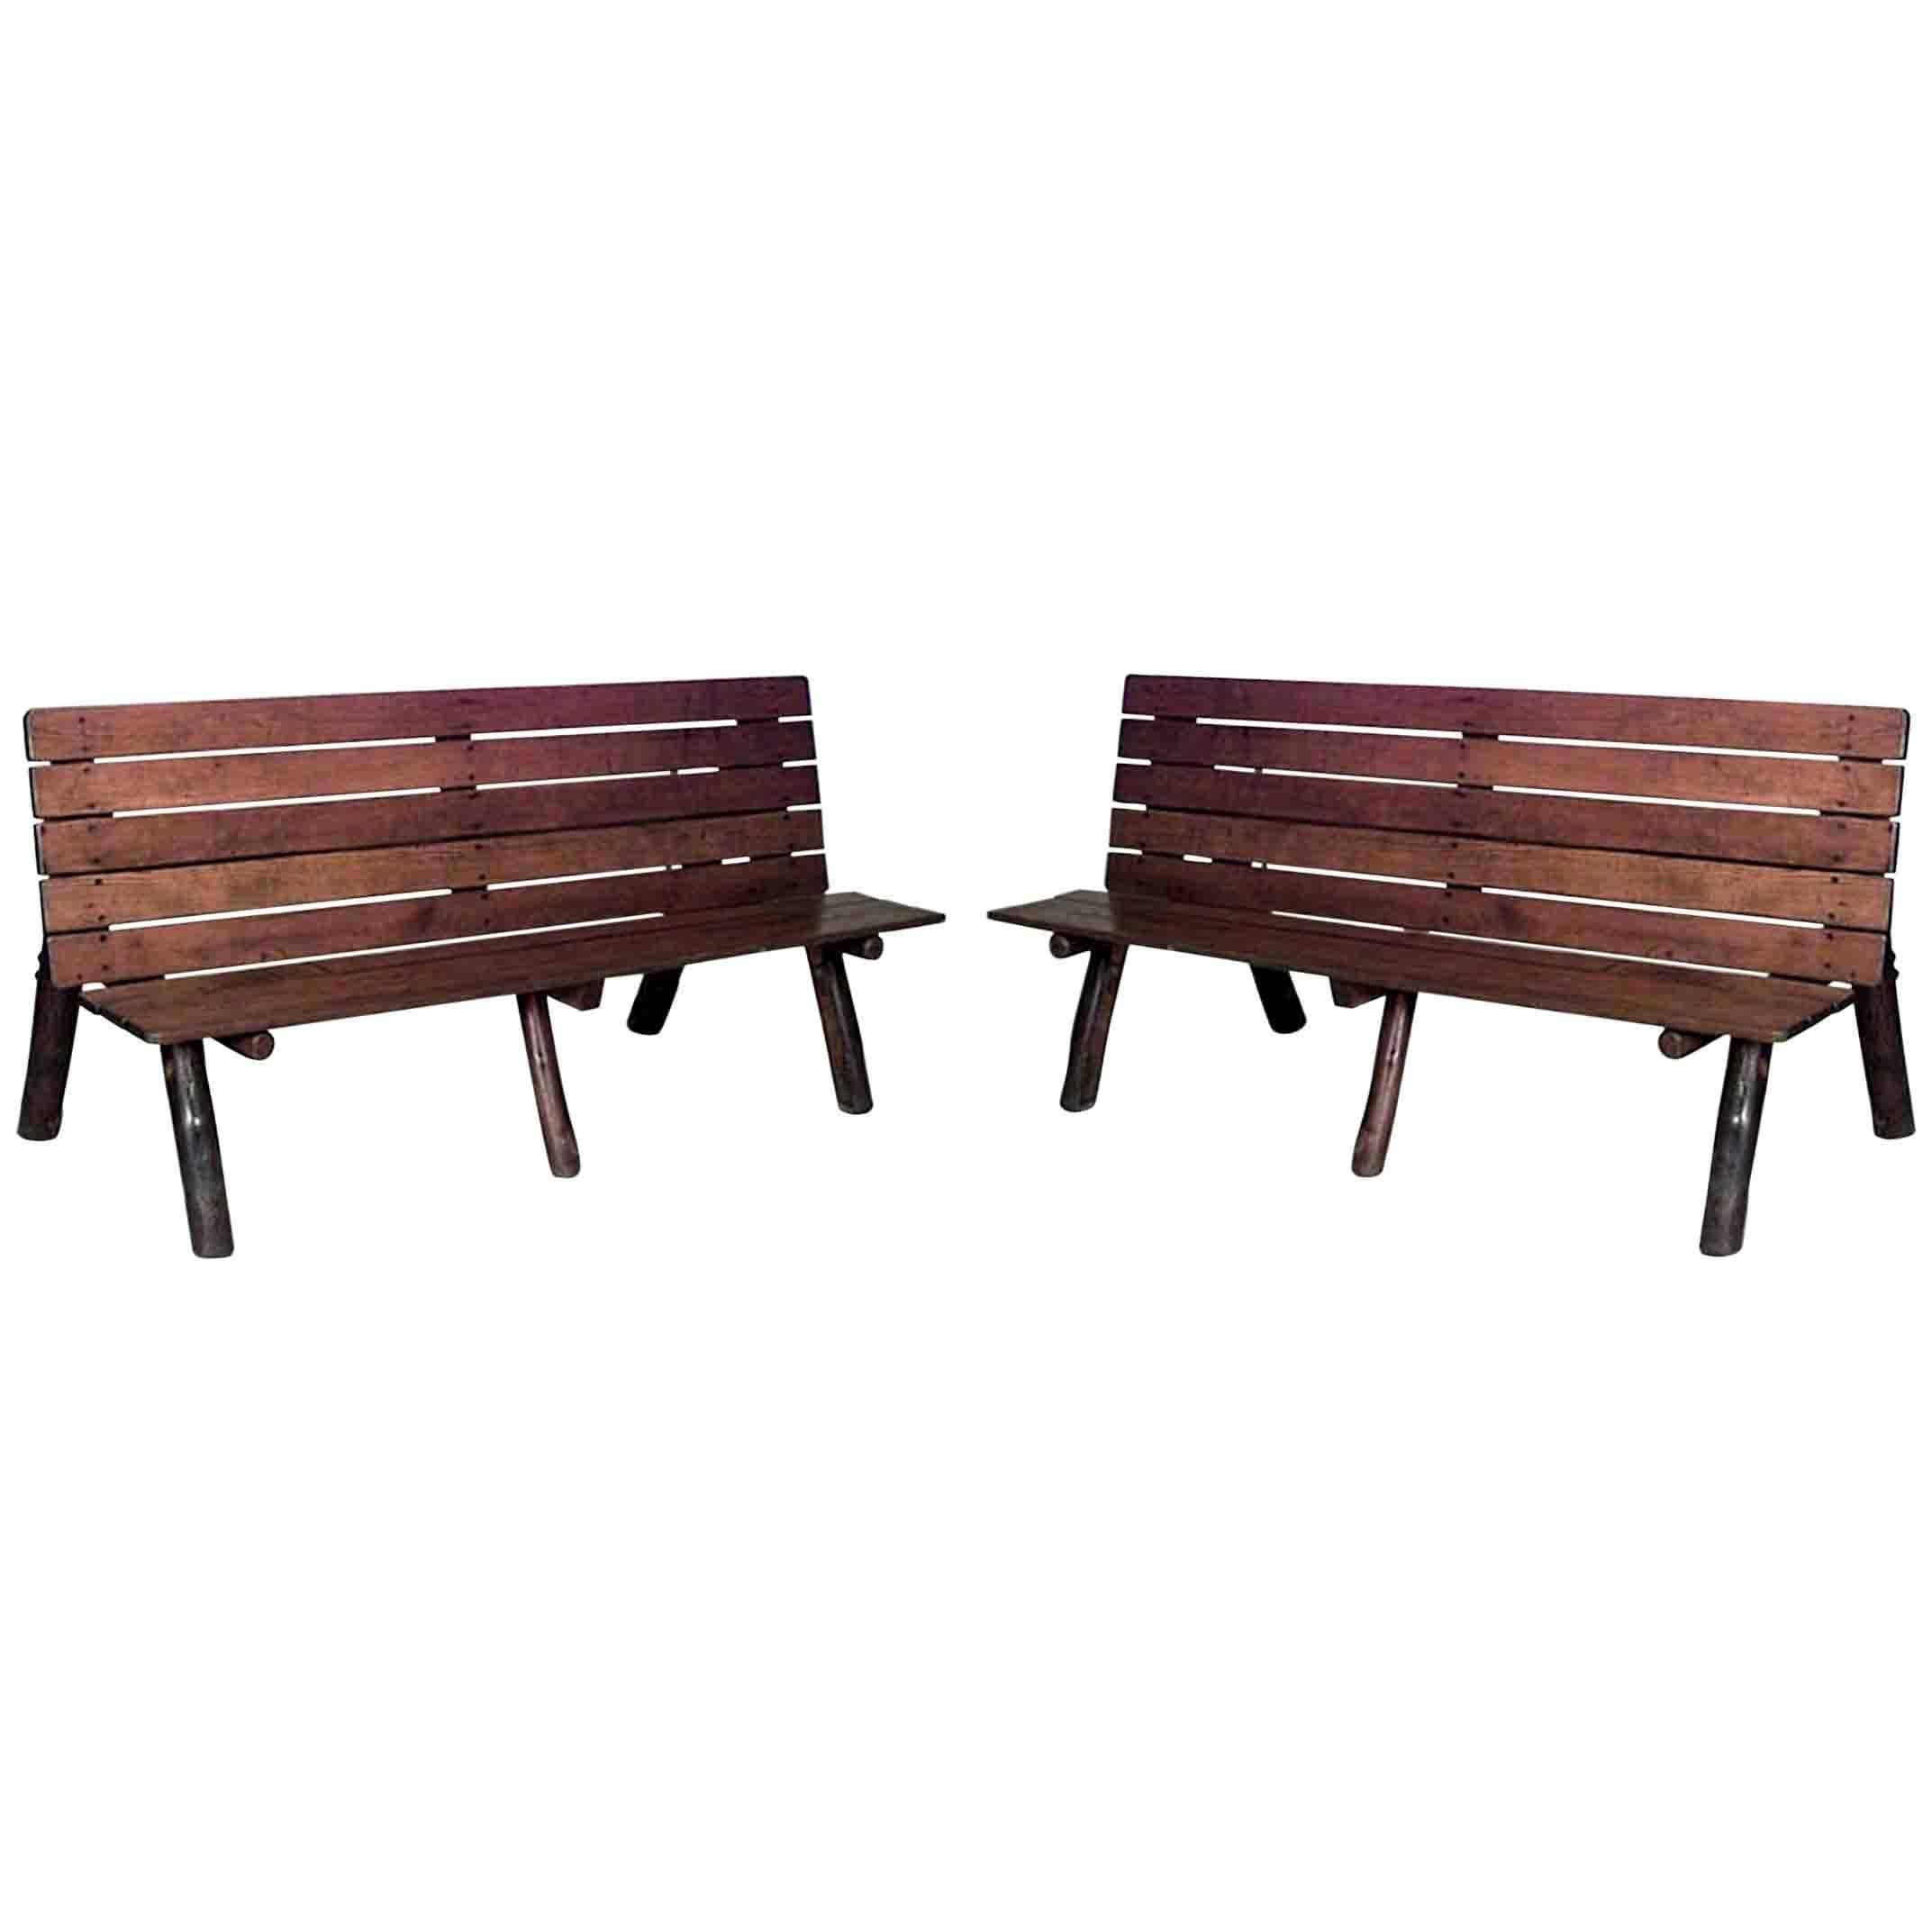 Pair of American Rustic Old Hickory Metamorphic Picnic Tables or Benches